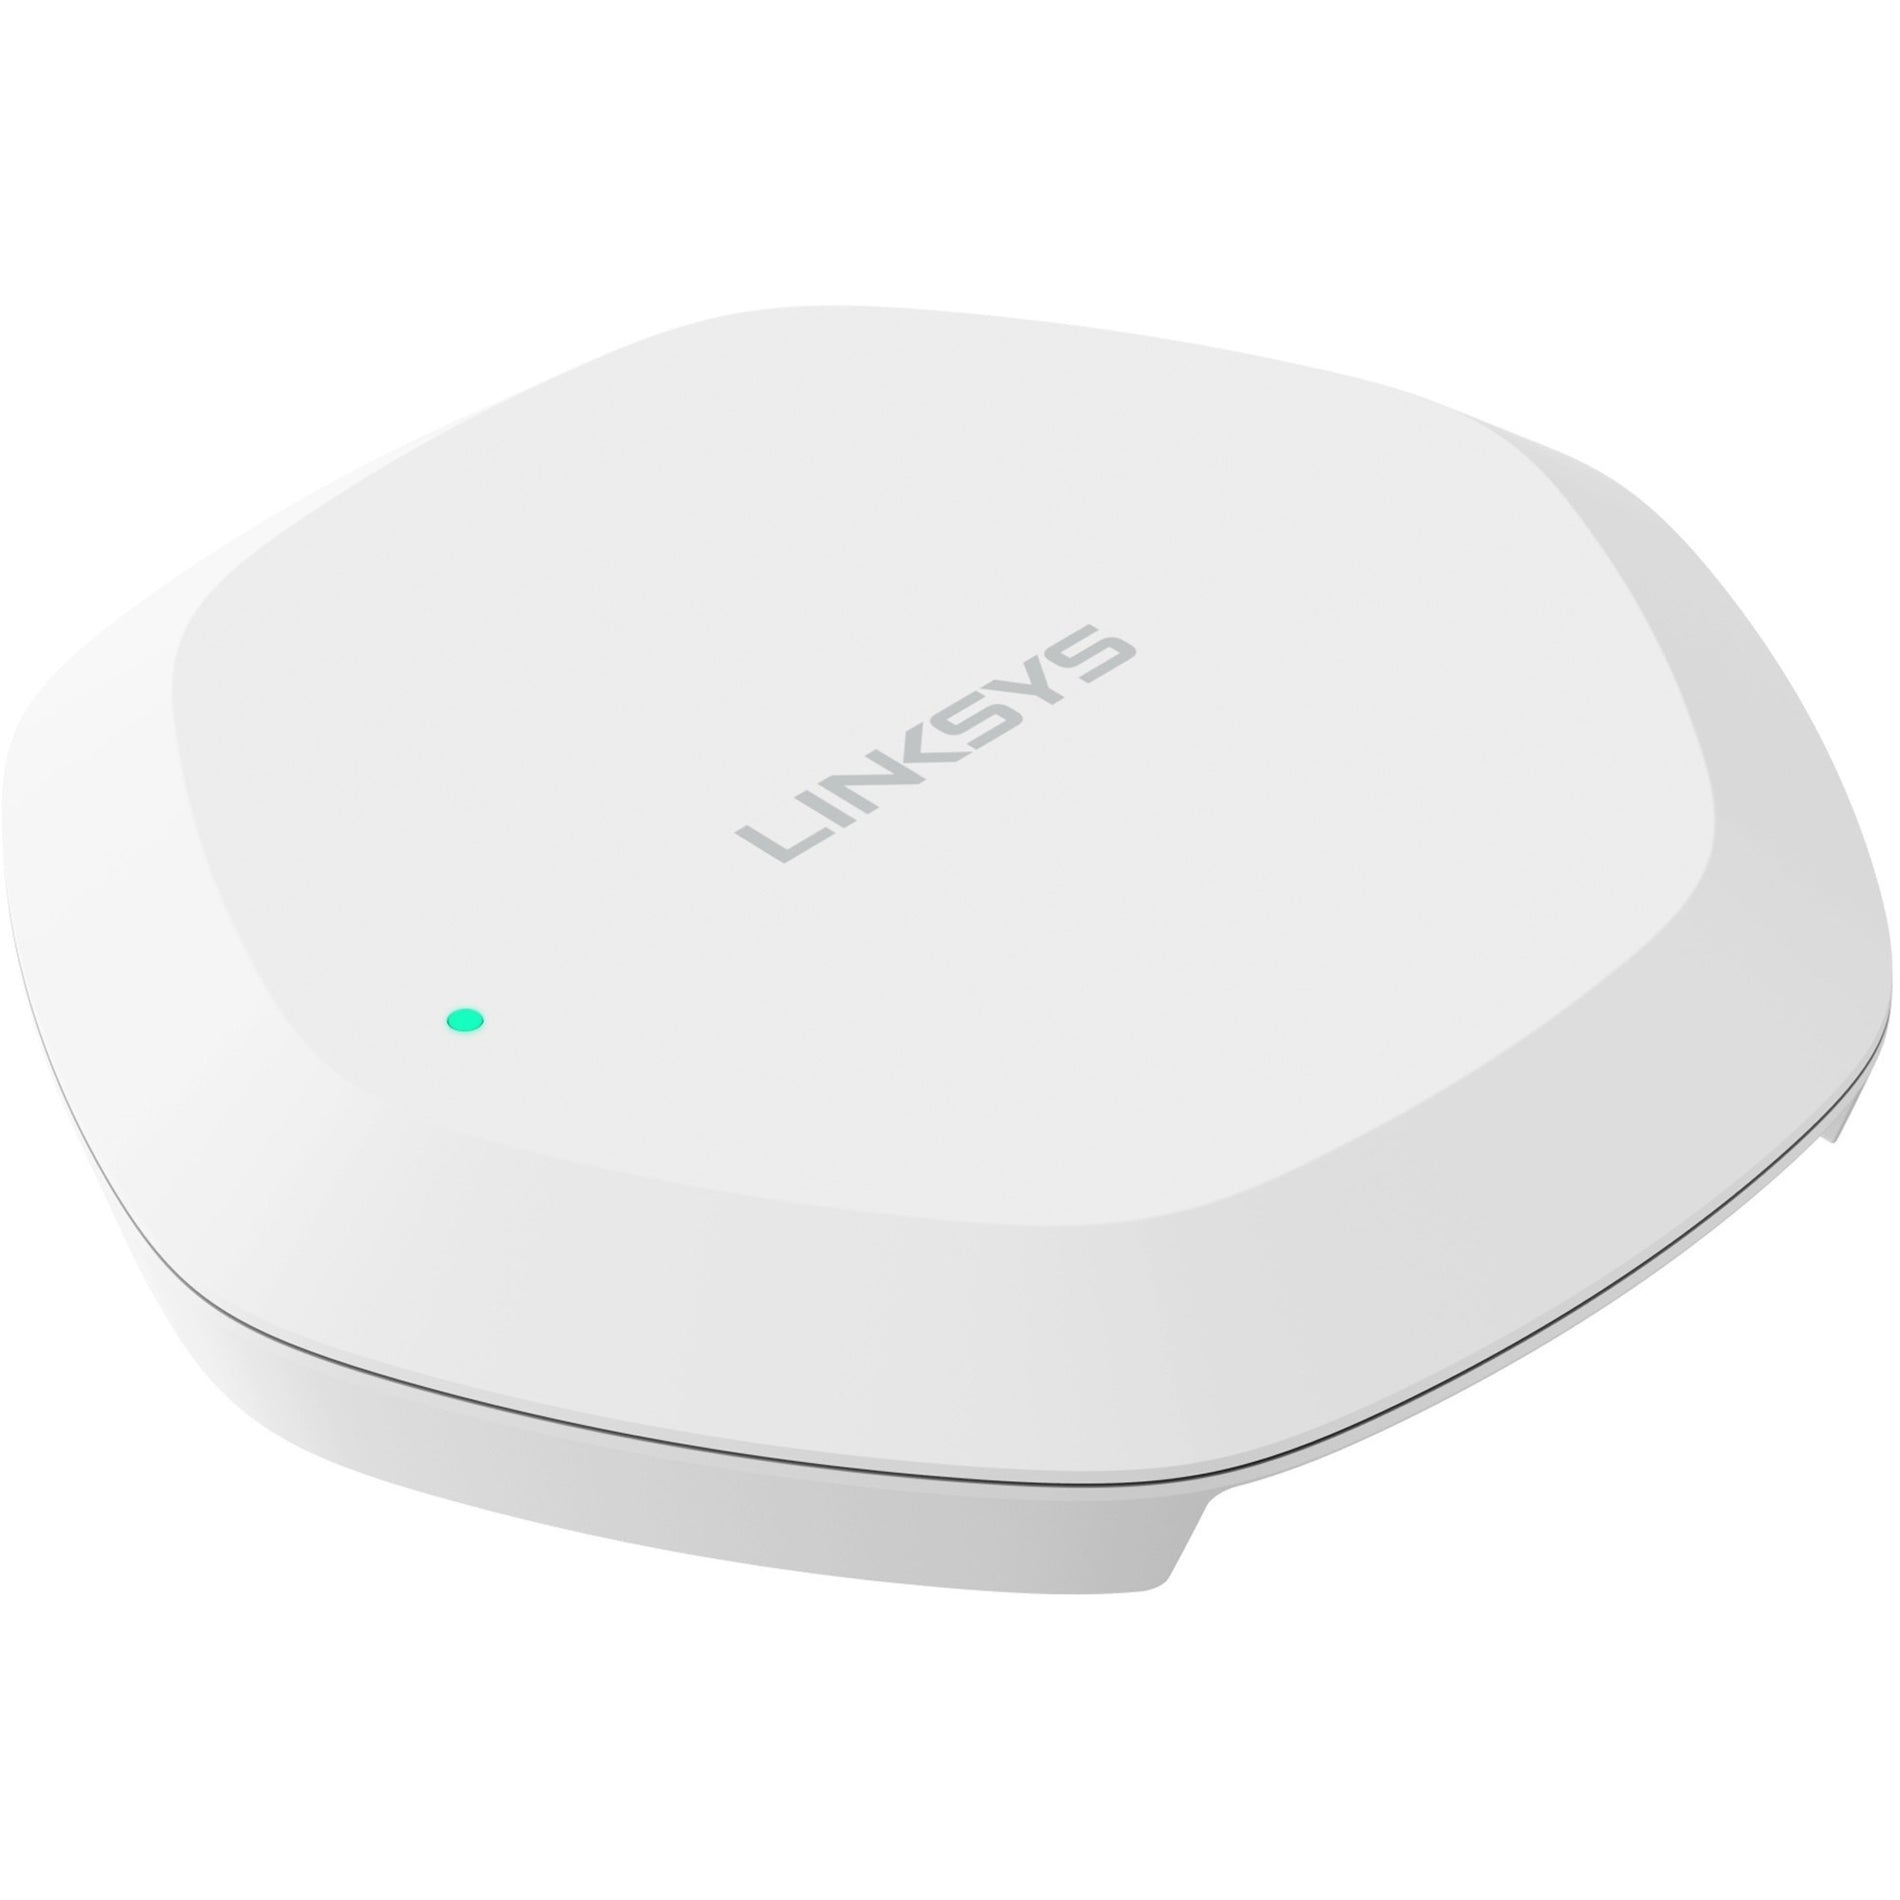 Linksys LAPAC1300C AC1300 WiFi 5 Indoor Wireless Access Point TAA Compliant, Dual Band, Gigabit Ethernet, 1.27 Gbit/s